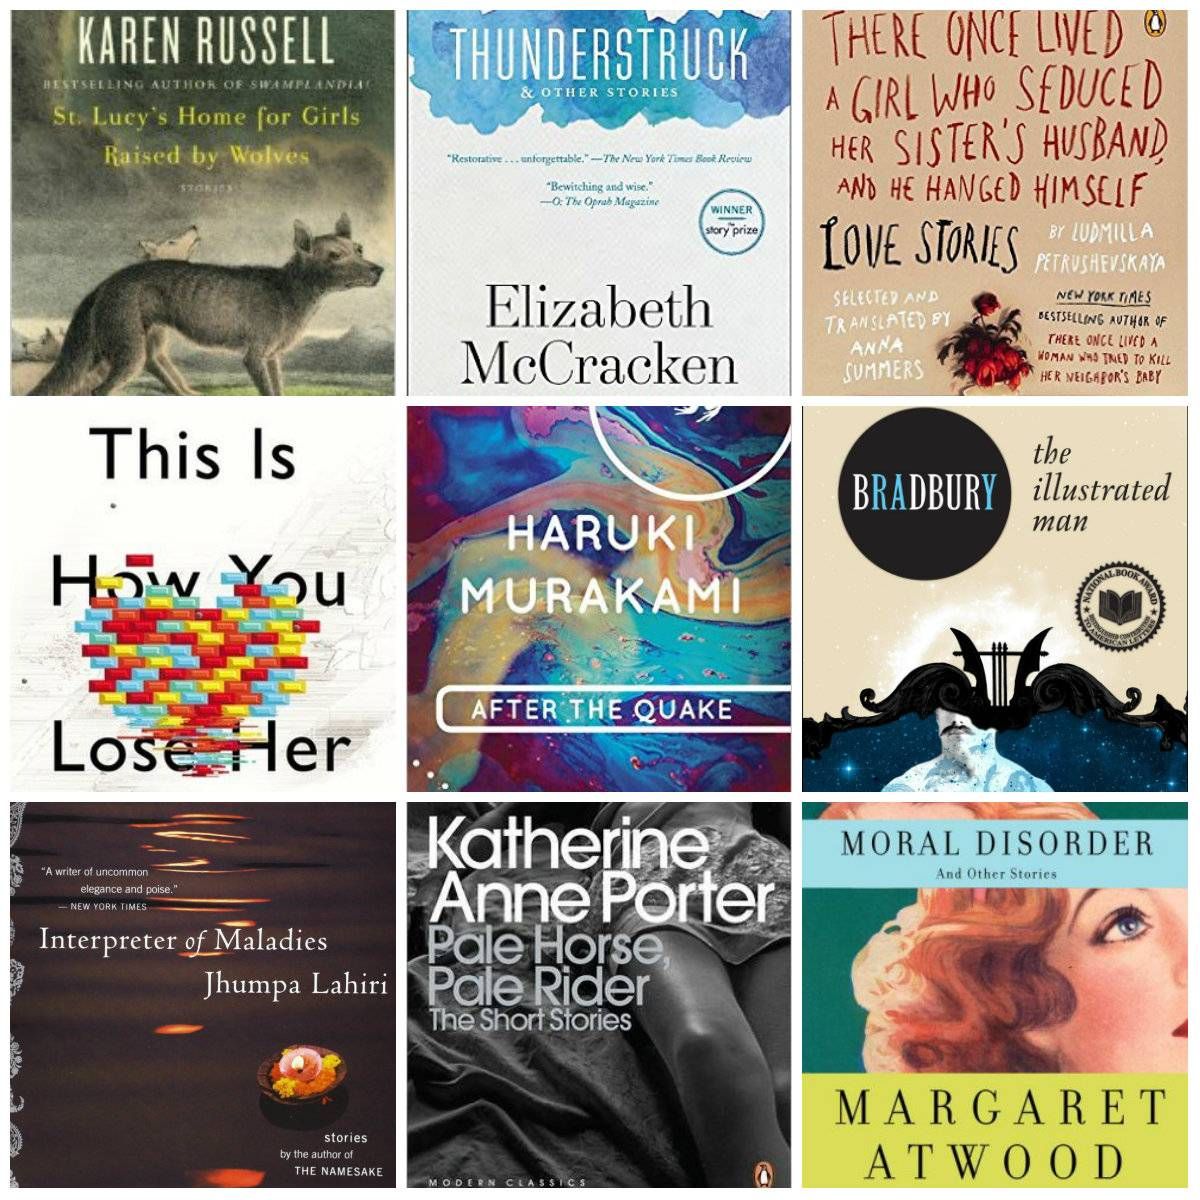 best short story collections reddit